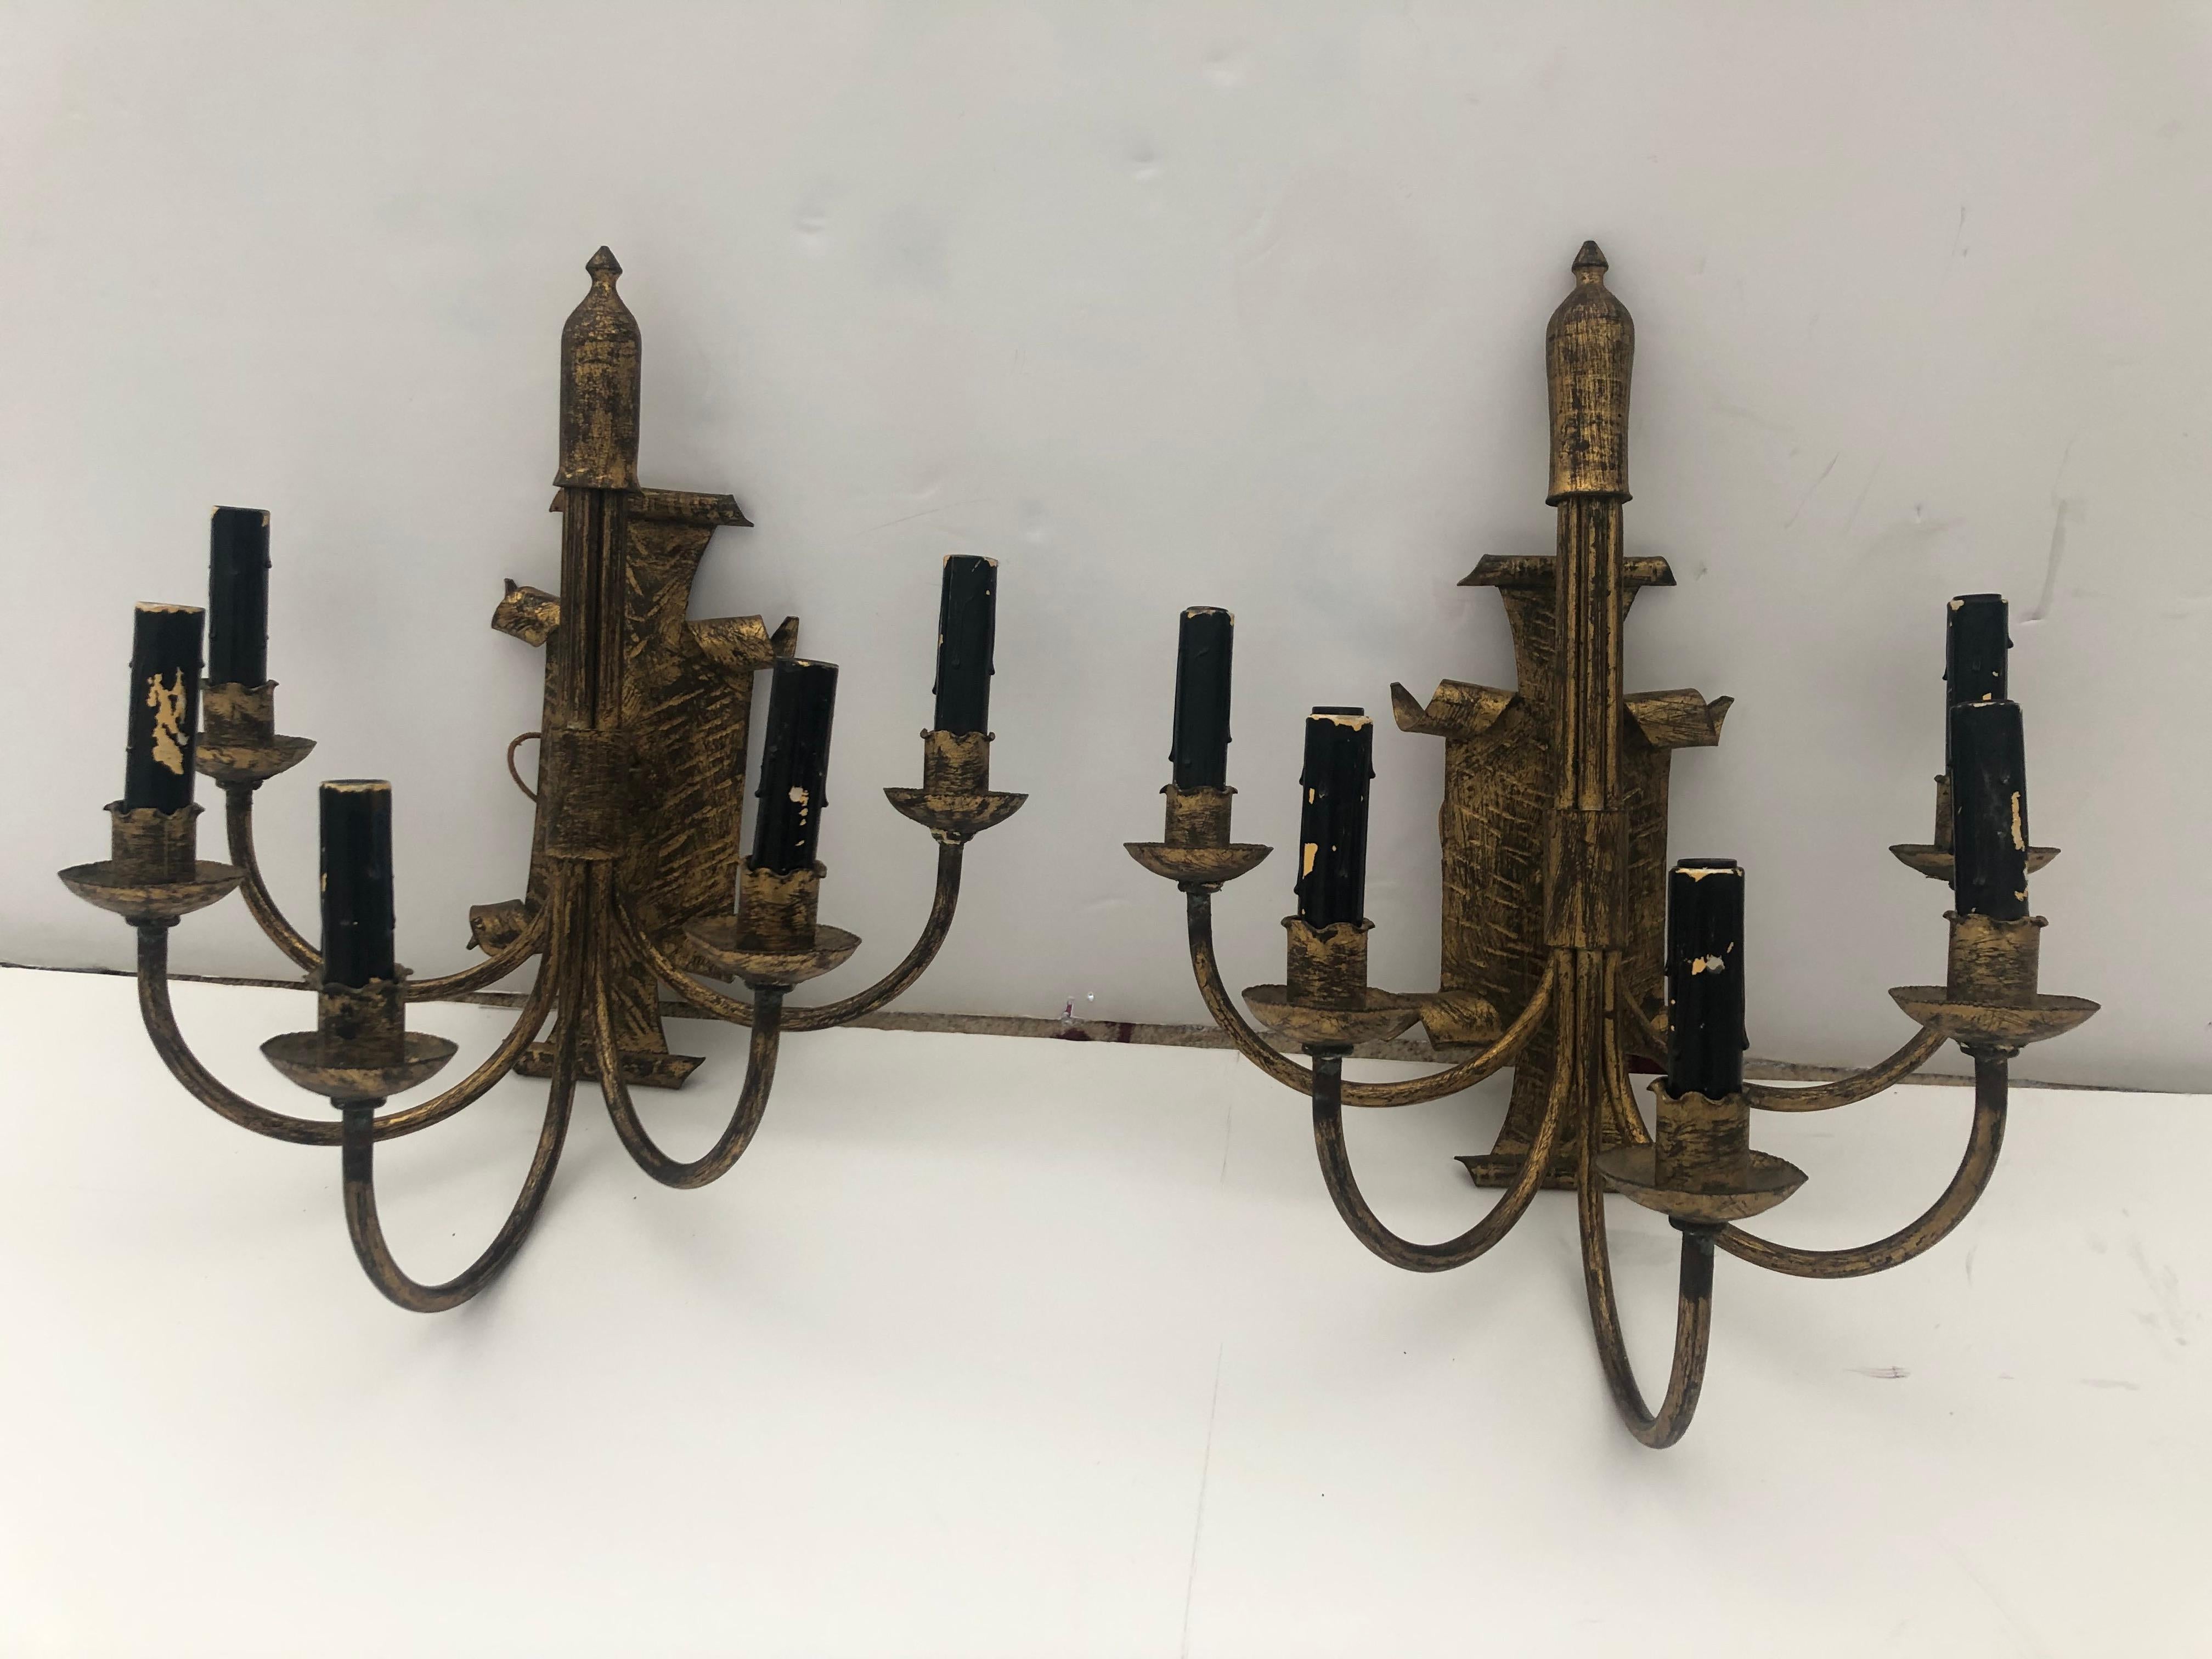 Unusual and striking pair of handsome 5-arm electrified candle sconces having bronze and black rubbed iron with shield style backs decorative regal finials.